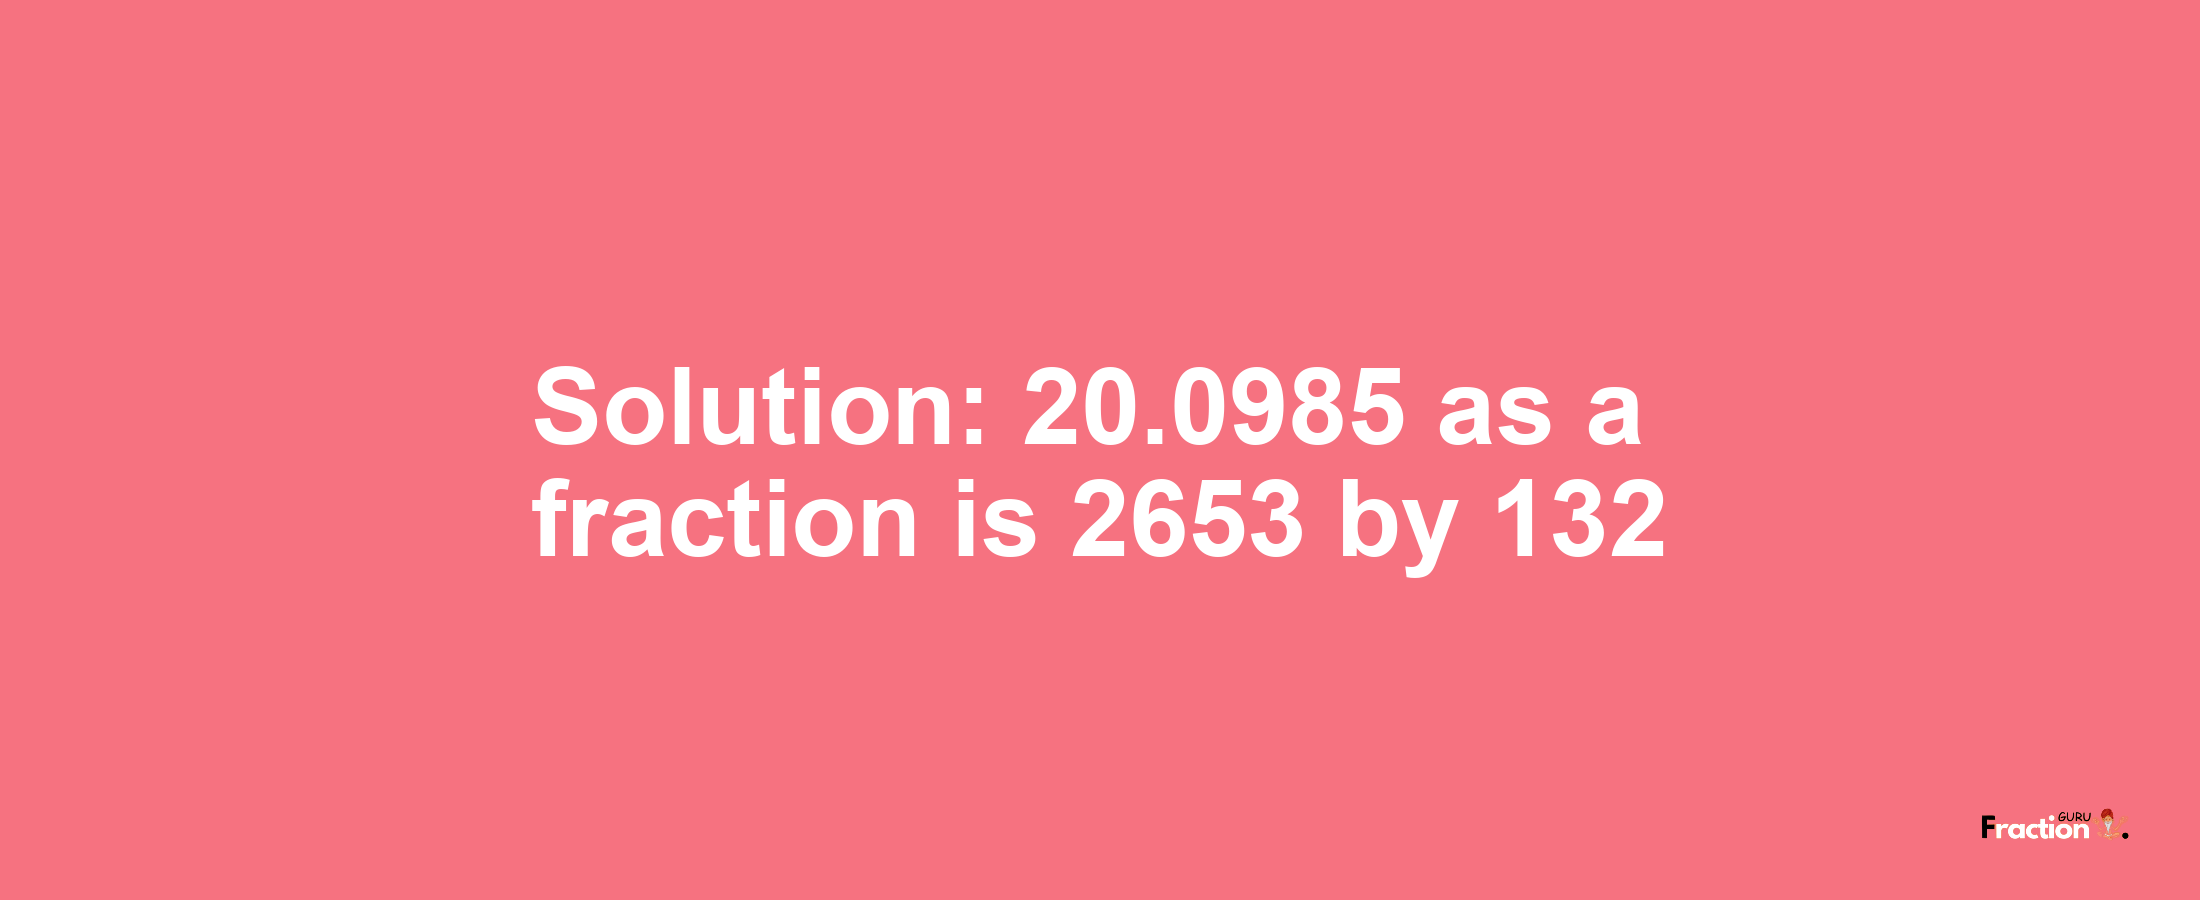 Solution:20.0985 as a fraction is 2653/132